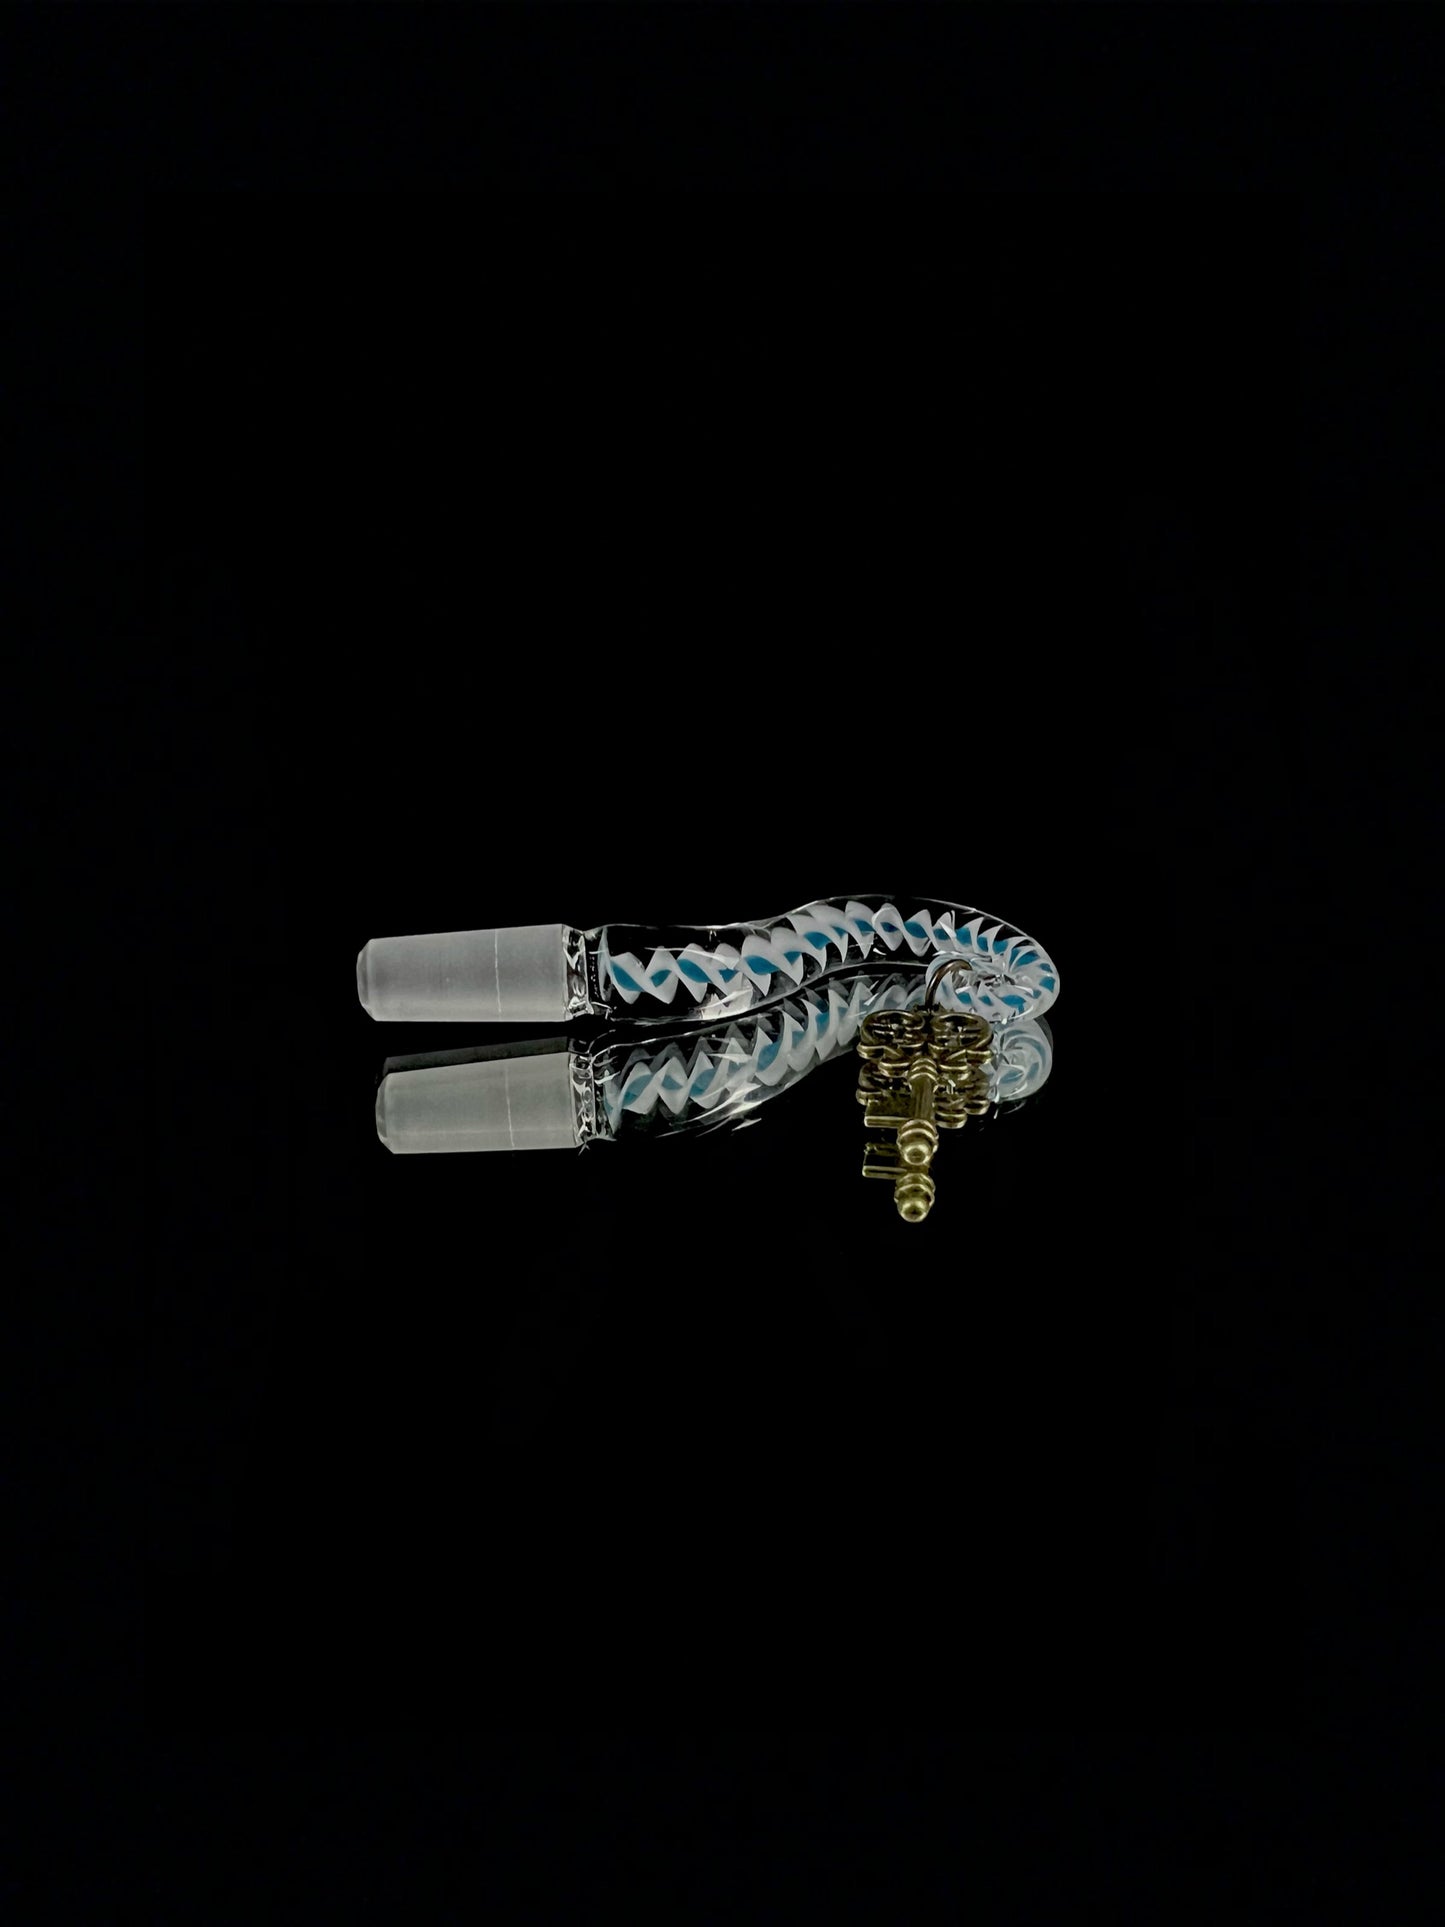 10mm stopper with key by Leviathan Glass